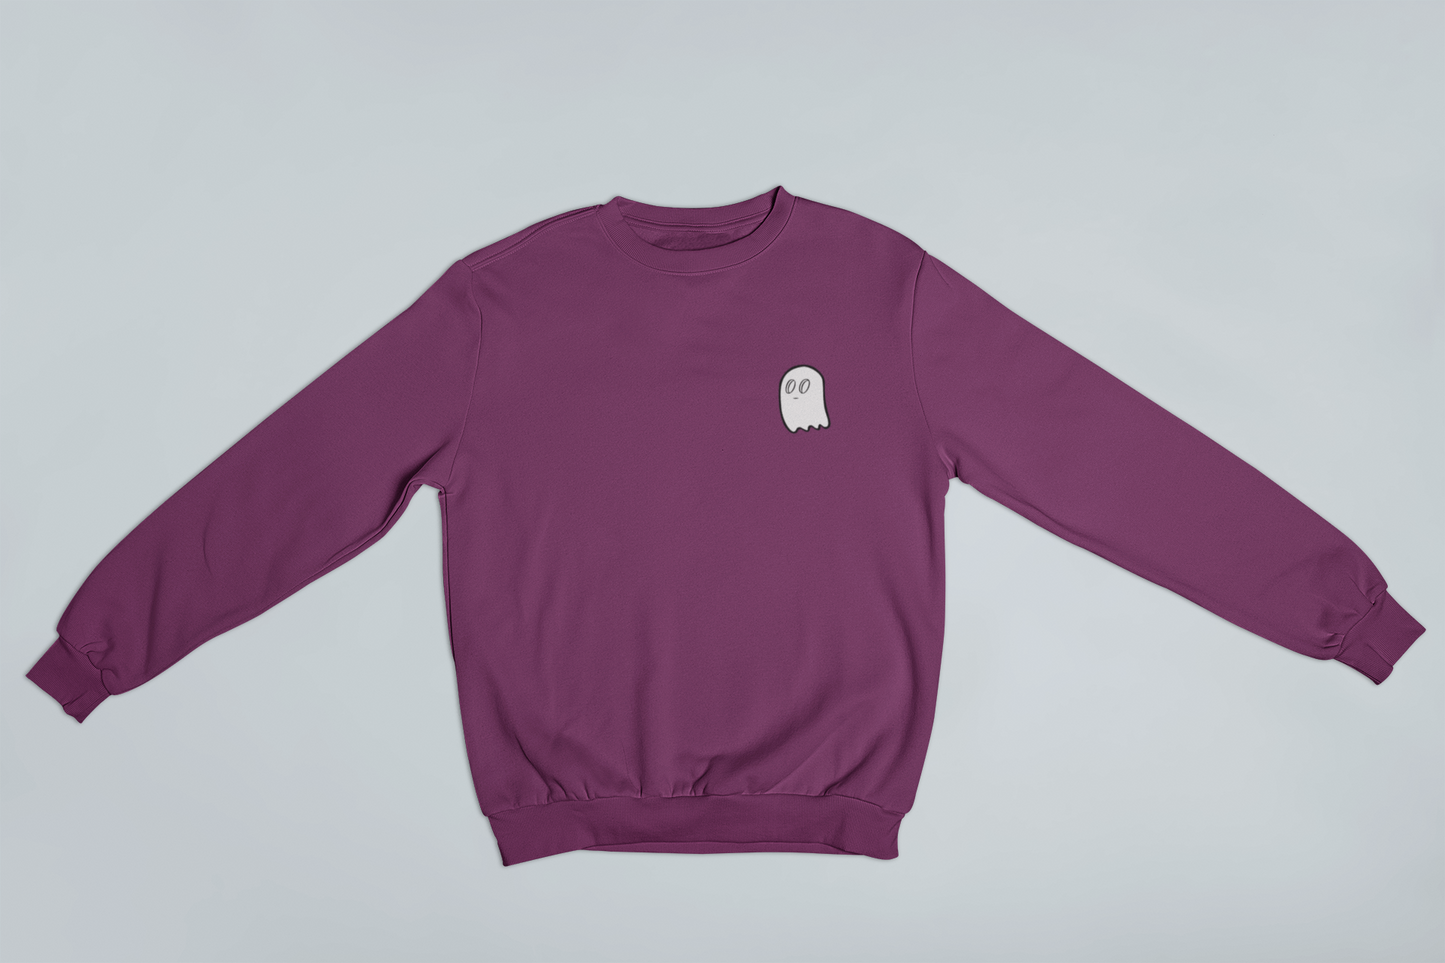 embroidered ghost crewneck maroon